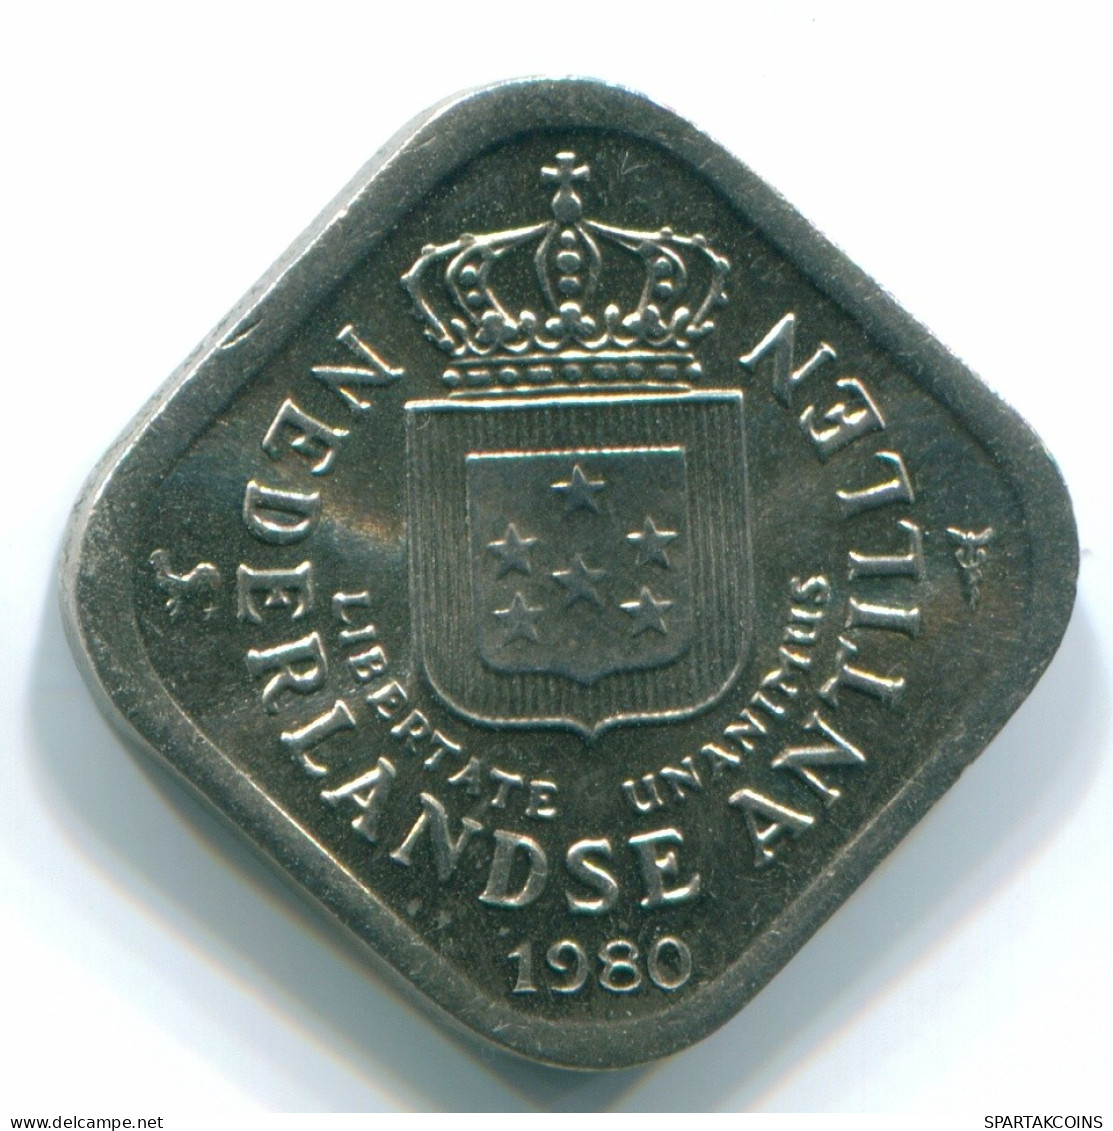 5 CENTS 1980 NETHERLANDS ANTILLES Nickel Colonial Coin #S12311.U.A - Netherlands Antilles